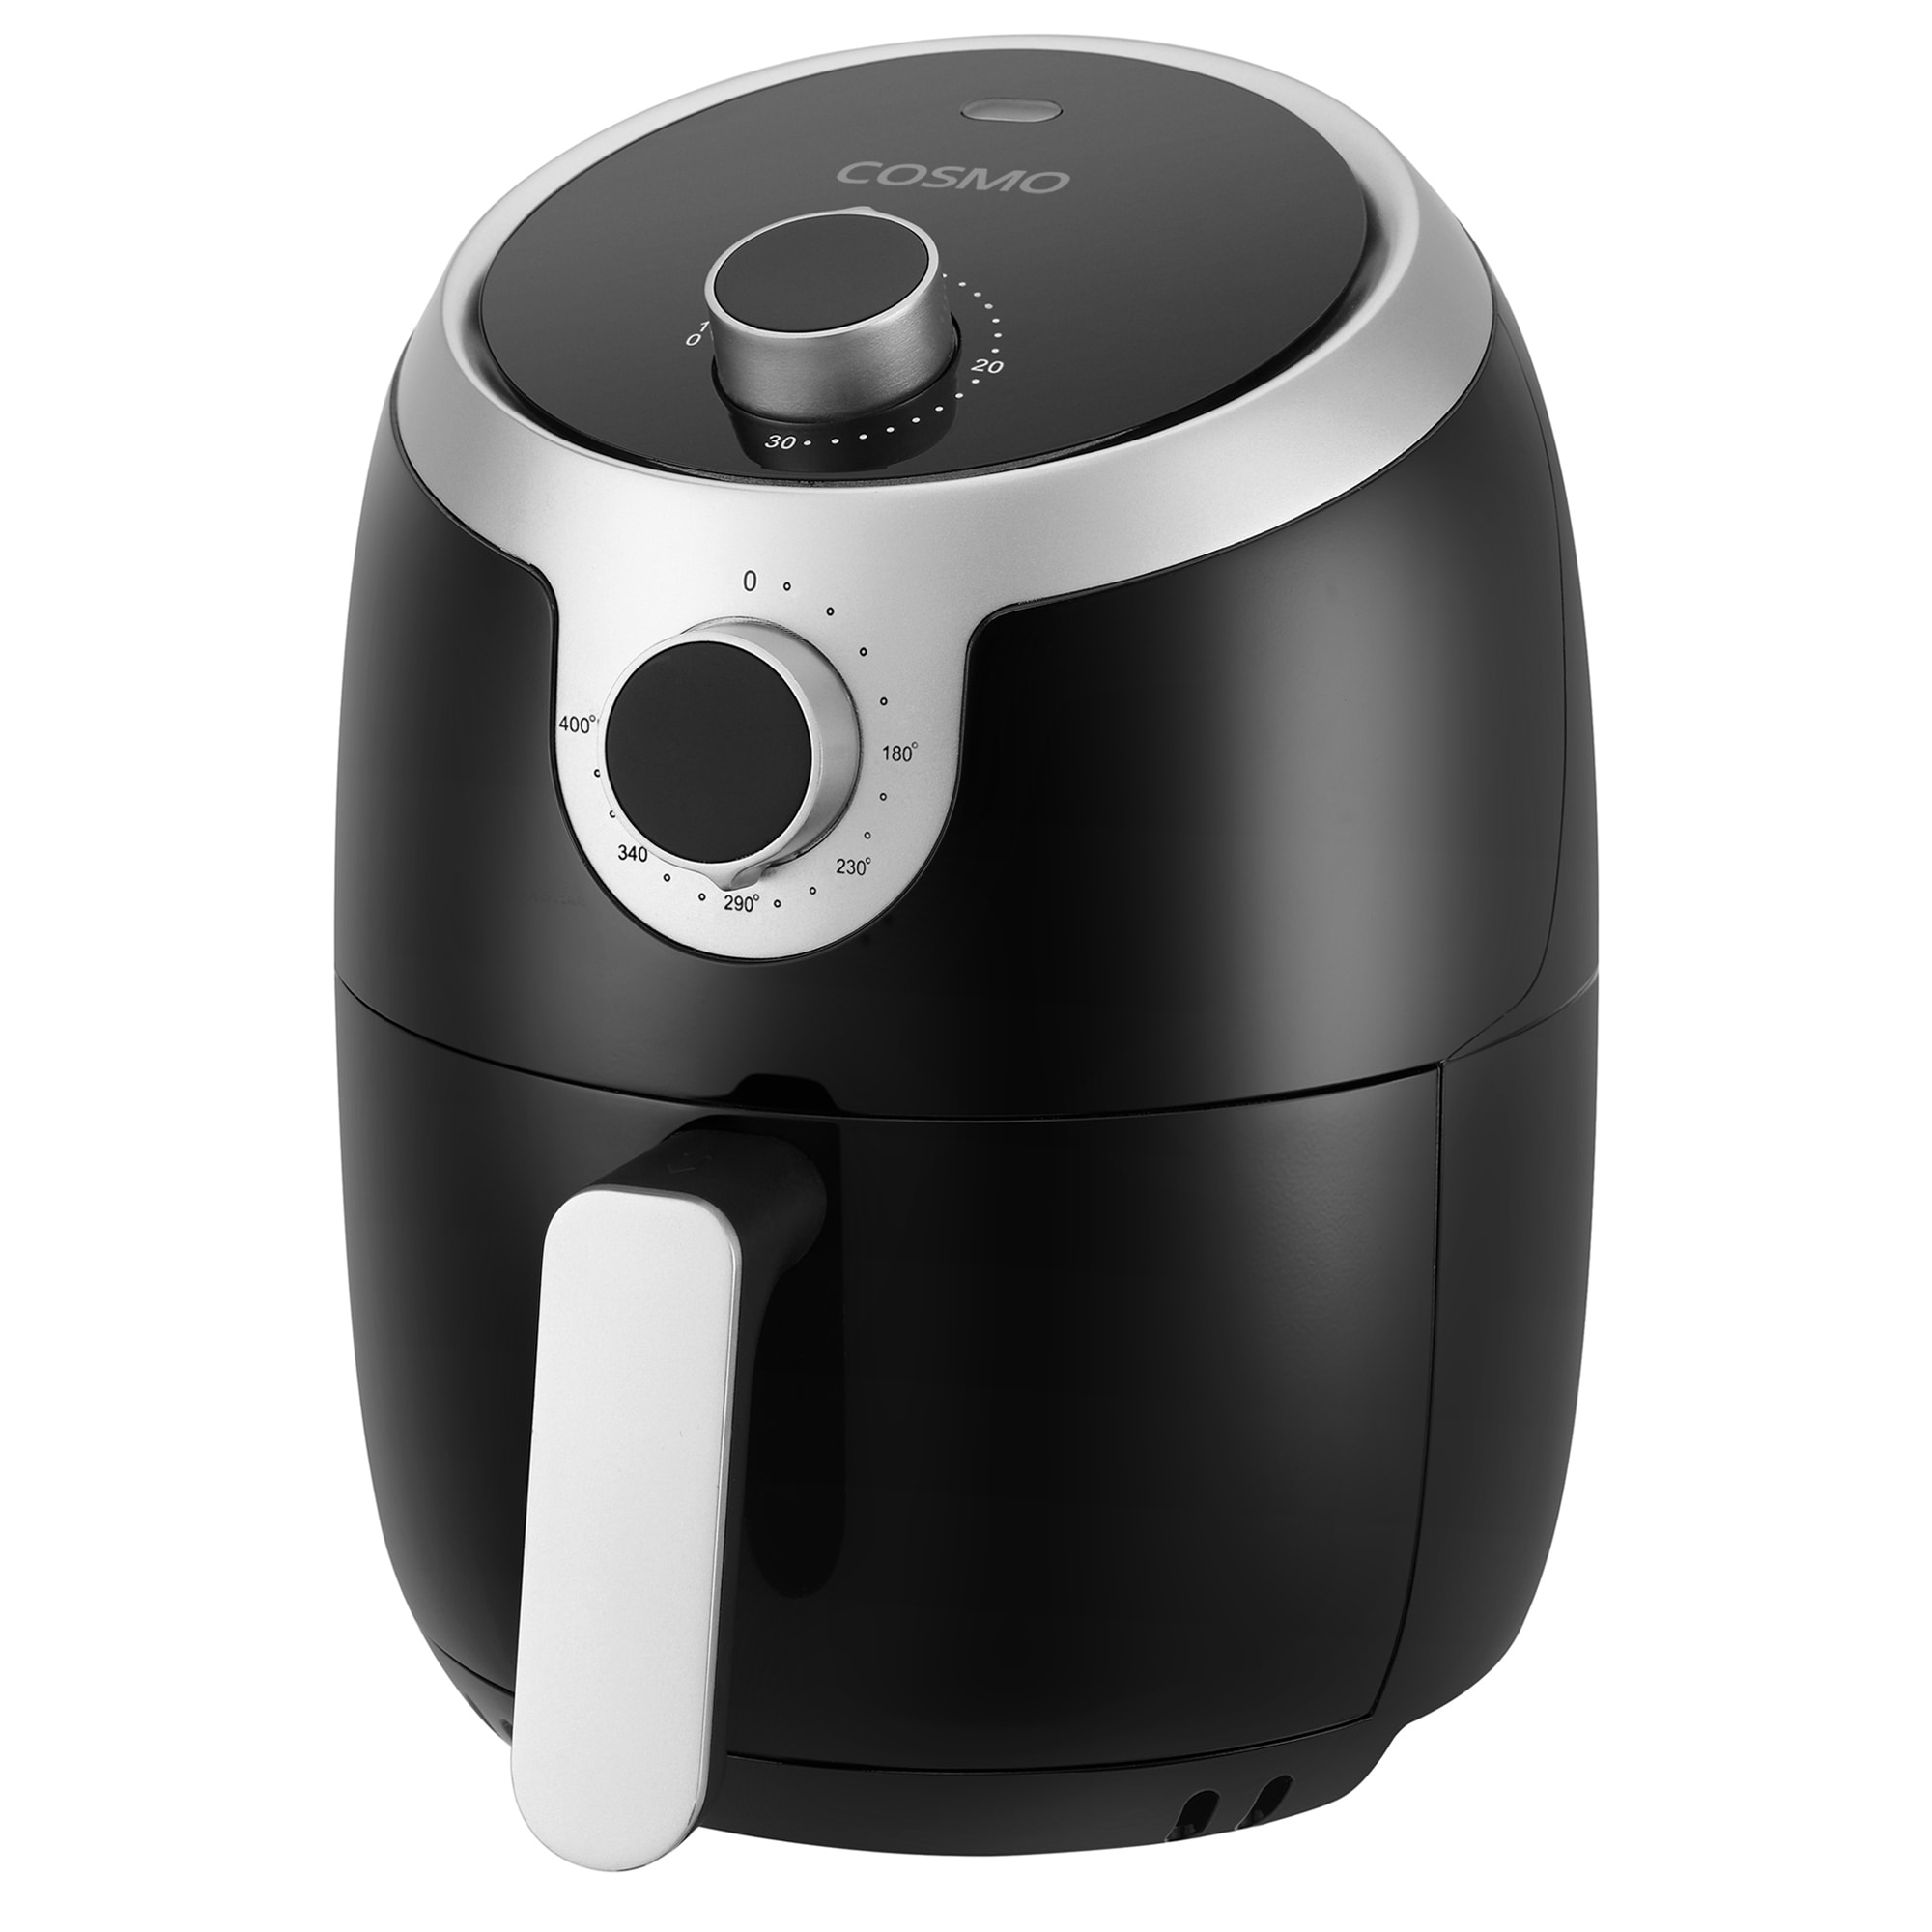 Ovente Electric Air Fryer with Timer, 3.2 Qt, 1400 Watts, Adjustable  Temperature Controls, Includes Fry Basket and Pan, Black (FAM21302B) 